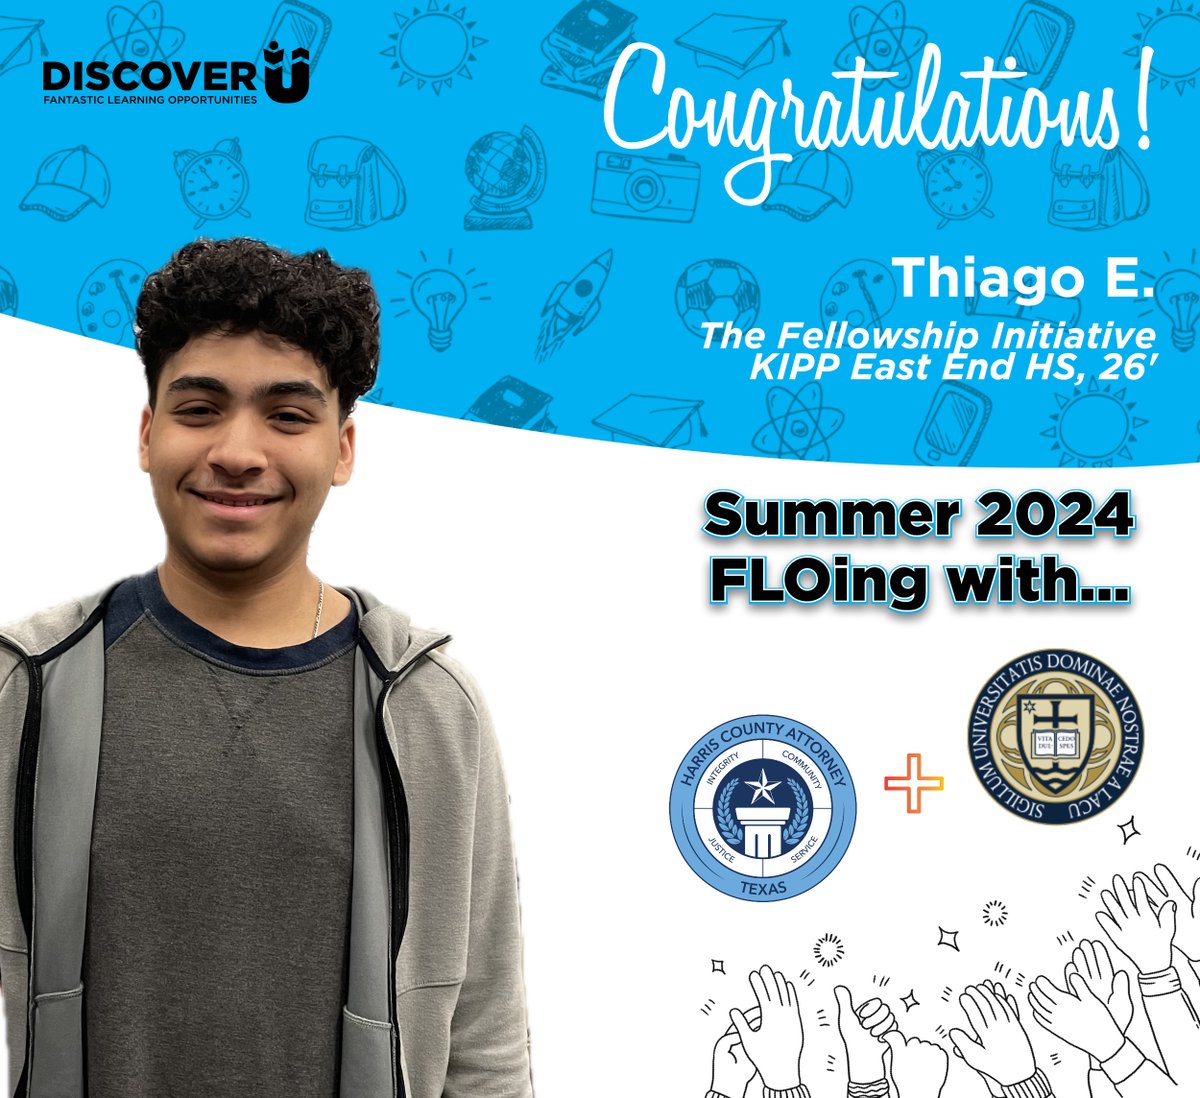 🎉 Congrats to Thiago, from KIPP East End HS and TFI Fellow of the Year! Accepted to the Summer Legal Academy @HarrisCountyAO & Notre Dame Summer Scholars @NDPreCollege! 🌟 'I'm excited to learn law & get the college experience.' #ExperienceMatters #DiscoverU #SummerFLO #Accepted